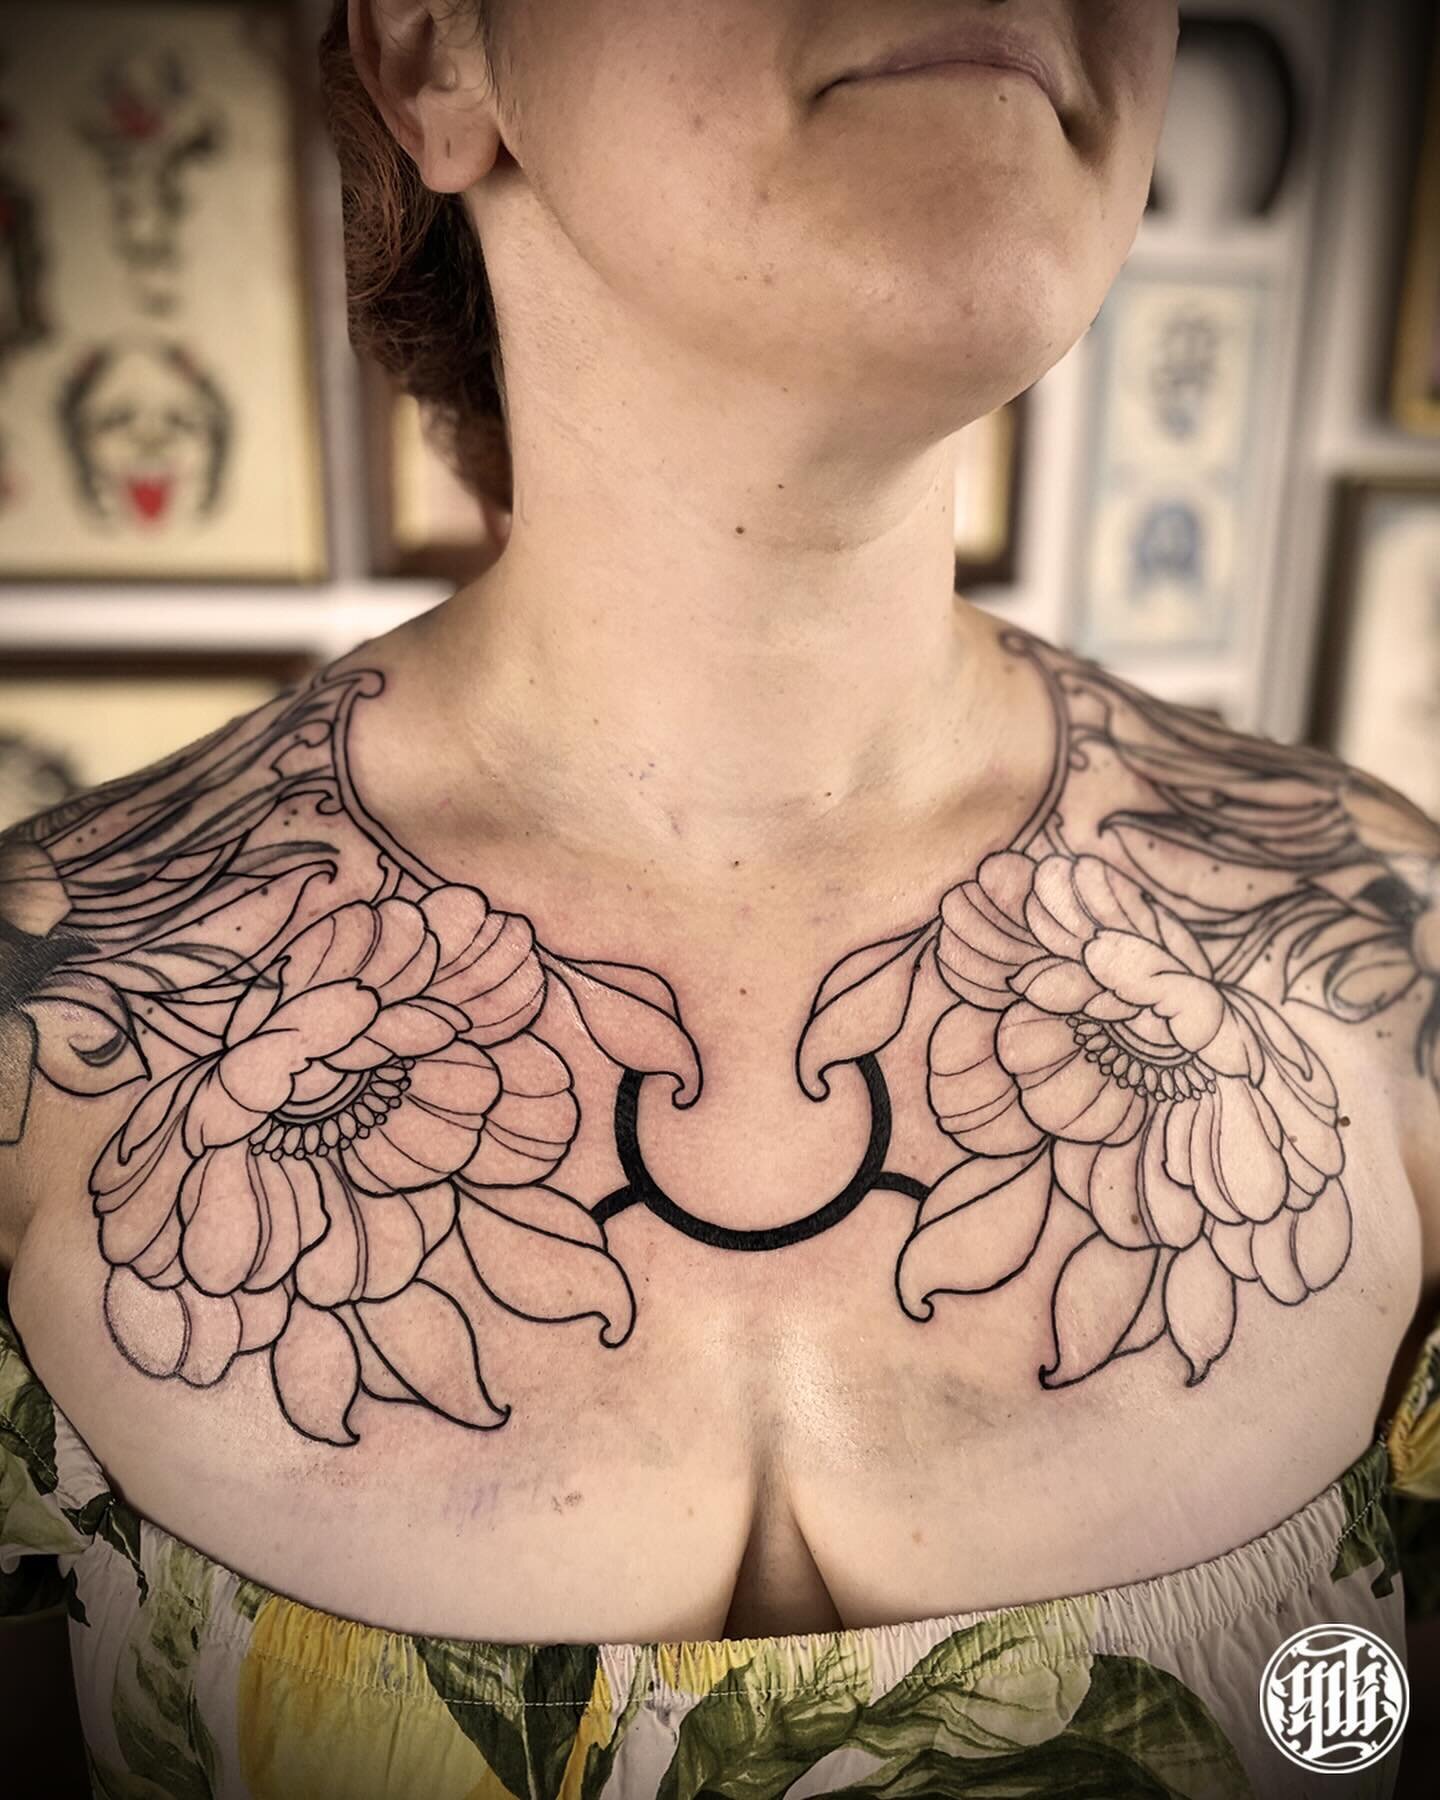 🔥 First session for this cover / blast over necklace for @meurtmade 🌙 
Thanks a lot for your trust 🙏

🌗 Booking open for April 🌓
Next Guest : 
&mdash;&mdash;&mdash;&mdash;&mdash;&mdash;&mdash;&mdash;&mdash;&mdash;&mdash;&mdash;&mdash;&mdash;&mda